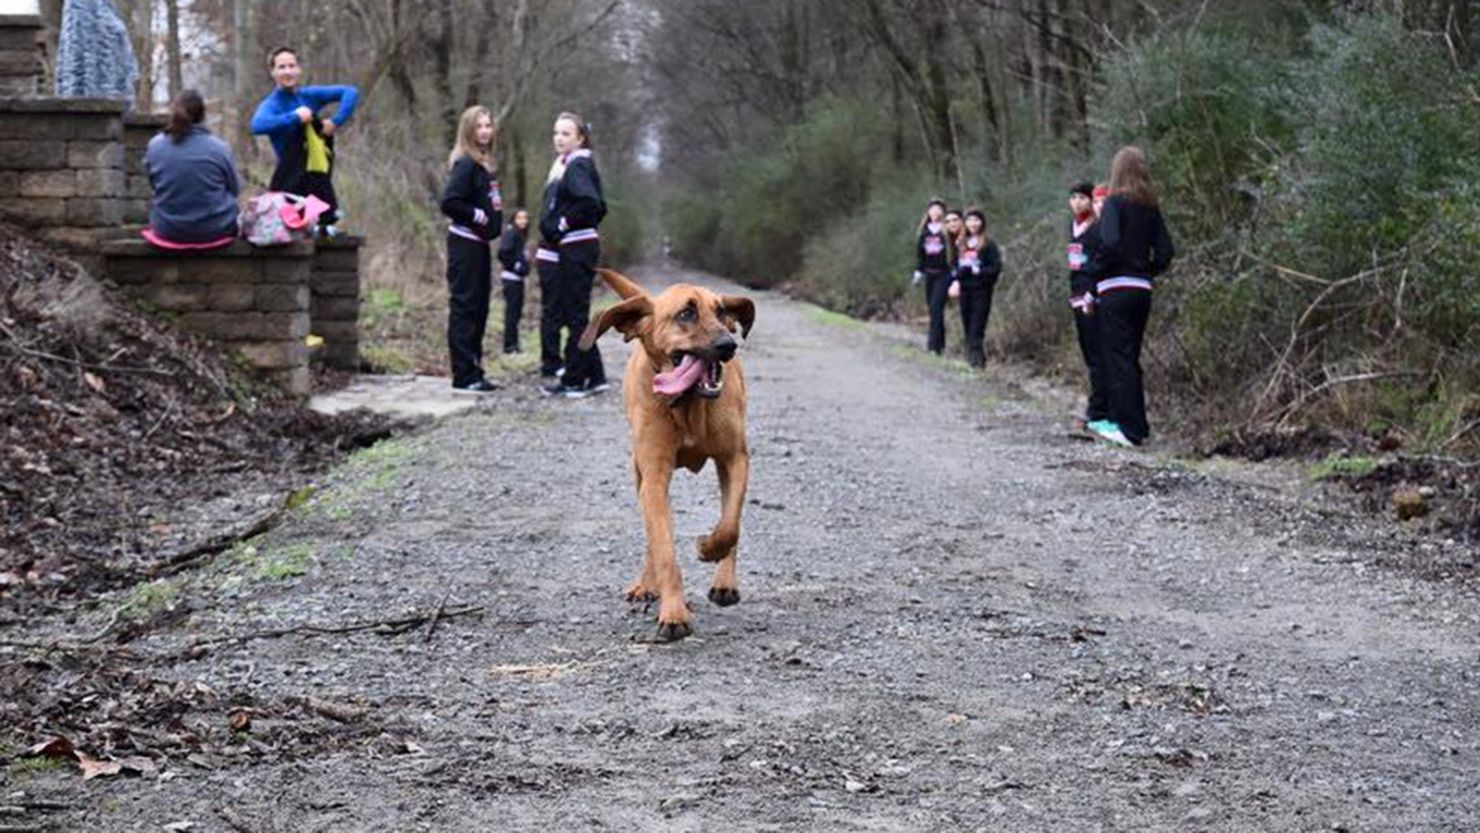 Ludivine ran the entire 13.1 miles without a leash or human companion.